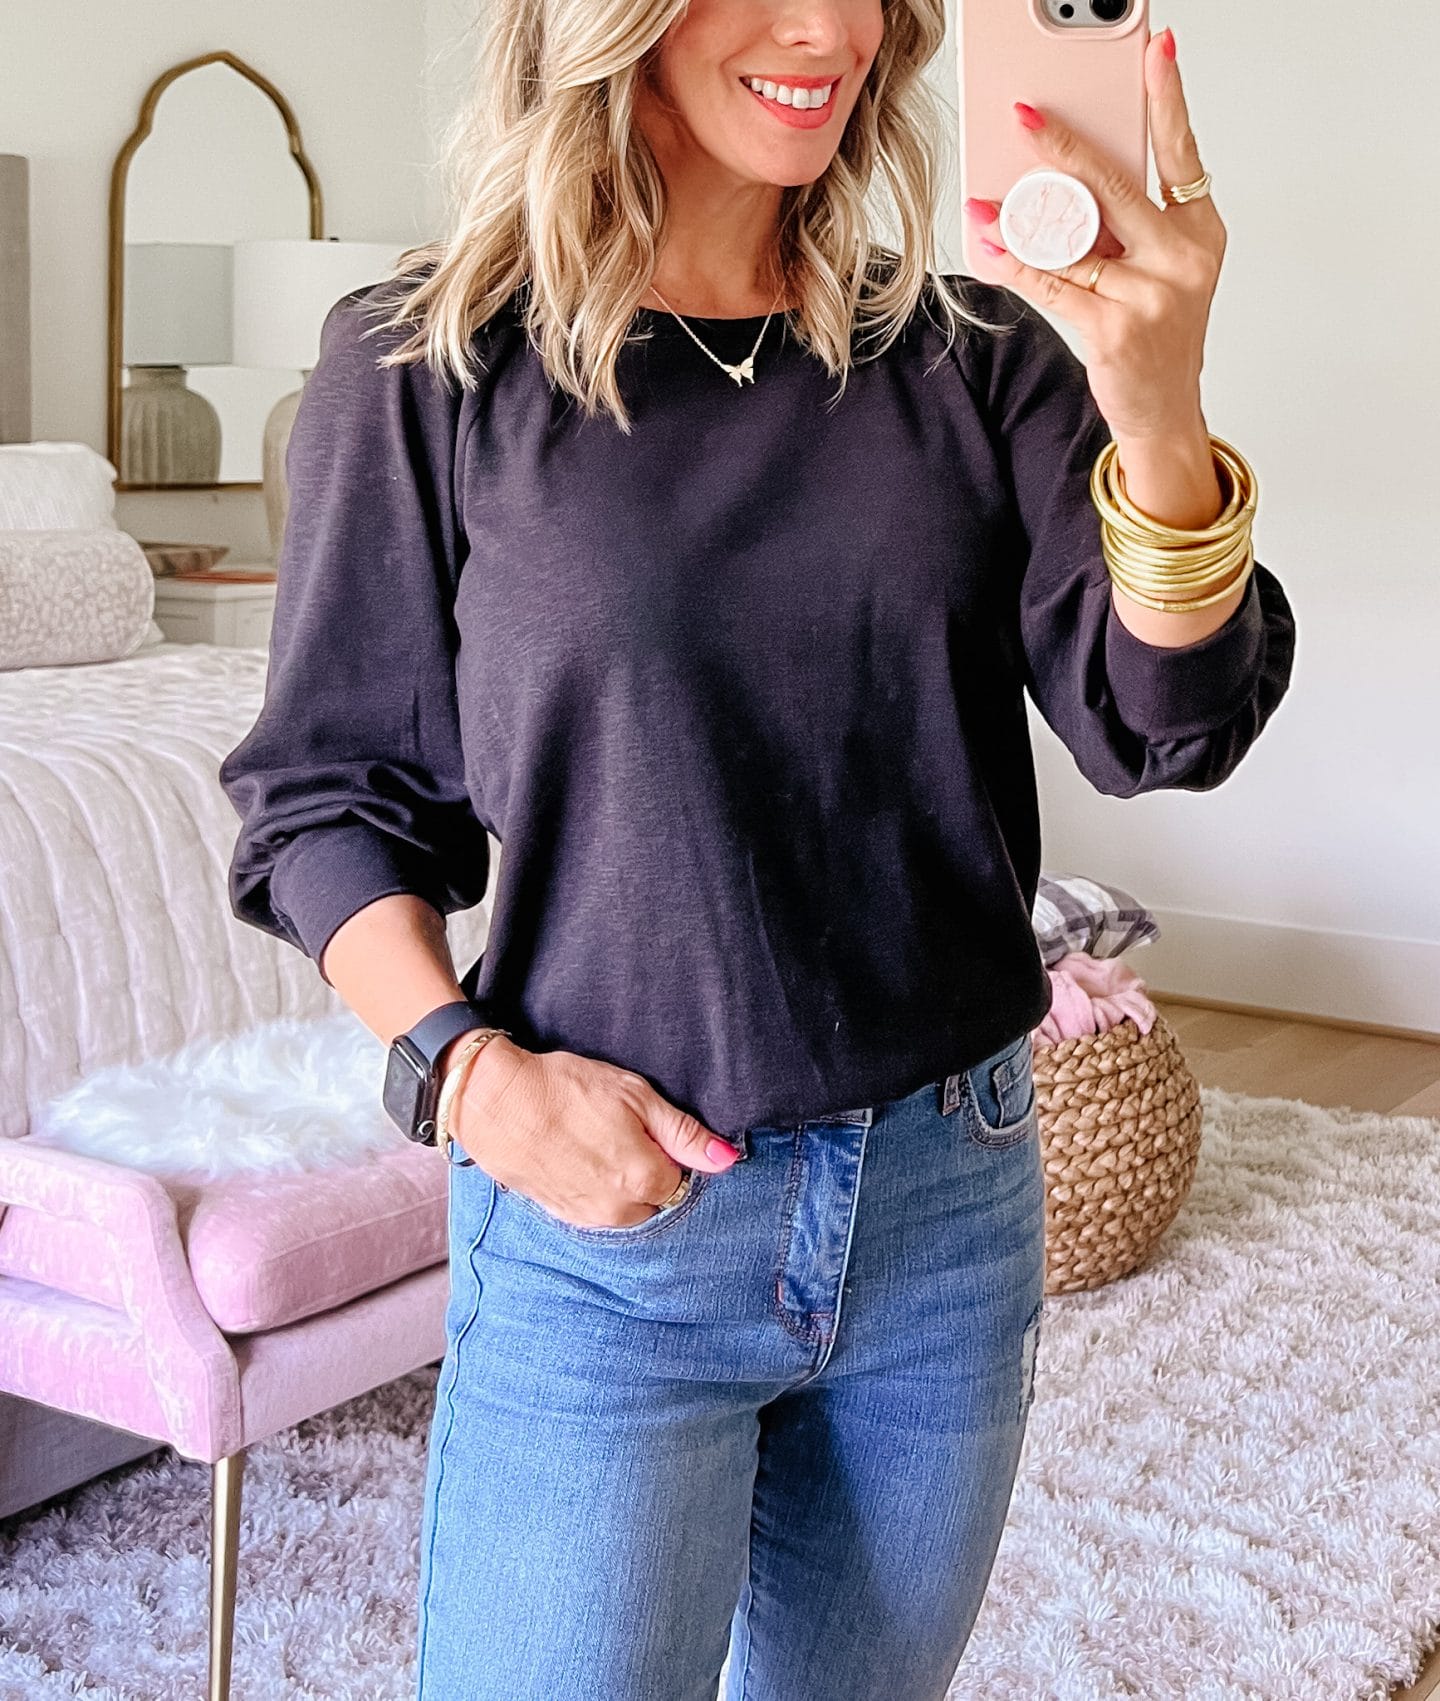 Puff Sleeve Long Sleeve top in black, Jeans, Sandals 